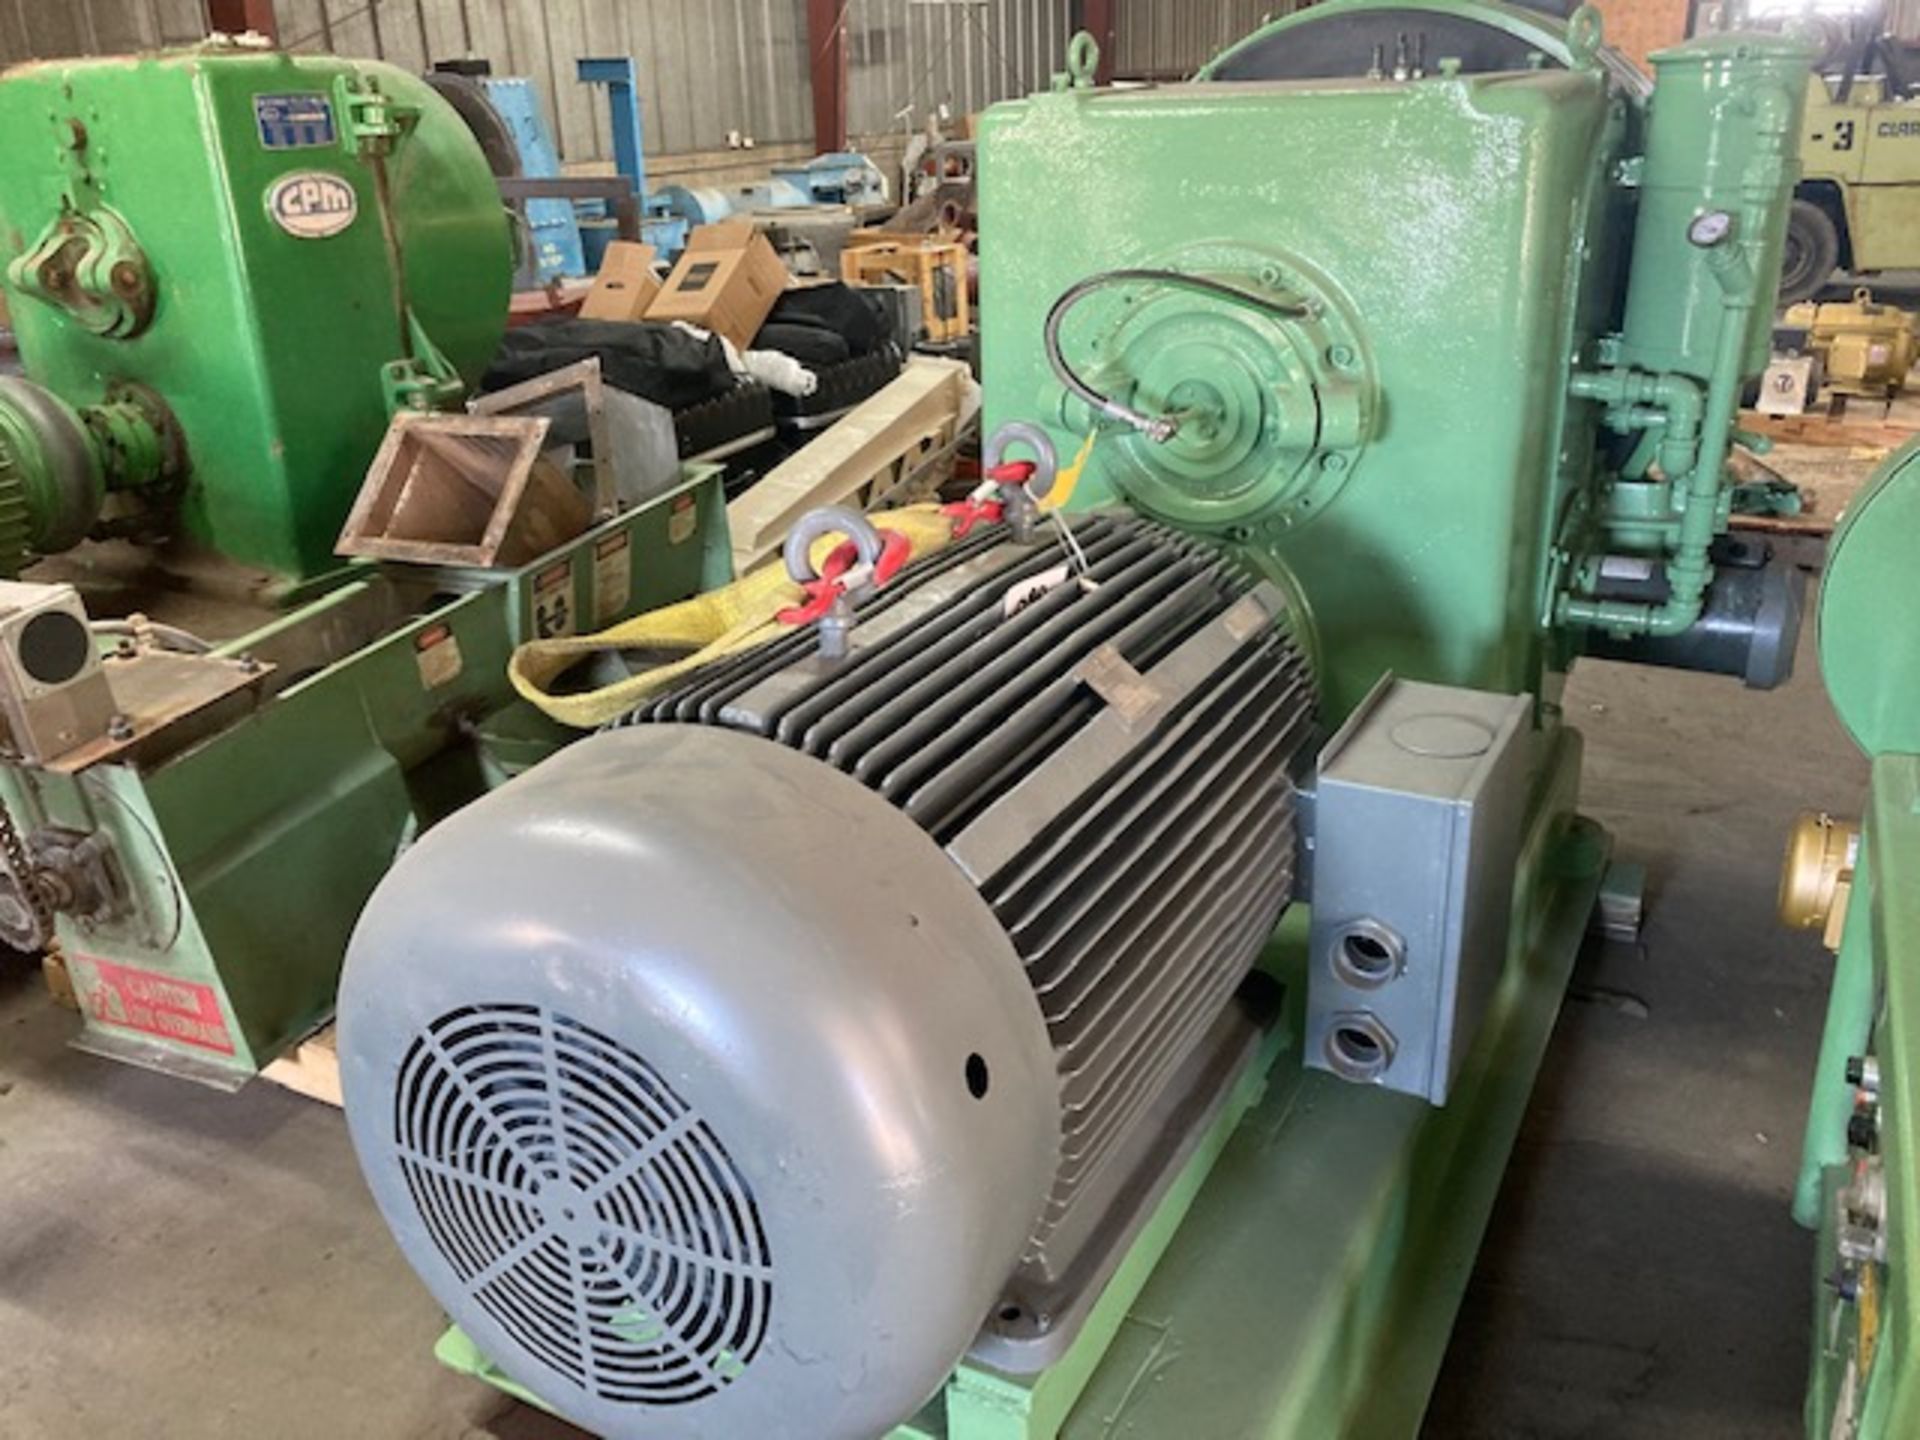 Located in Canon City CO: Rebuilt CPM 7000 pellet mill with new bearings, good gears, mainshaft, - Image 2 of 3